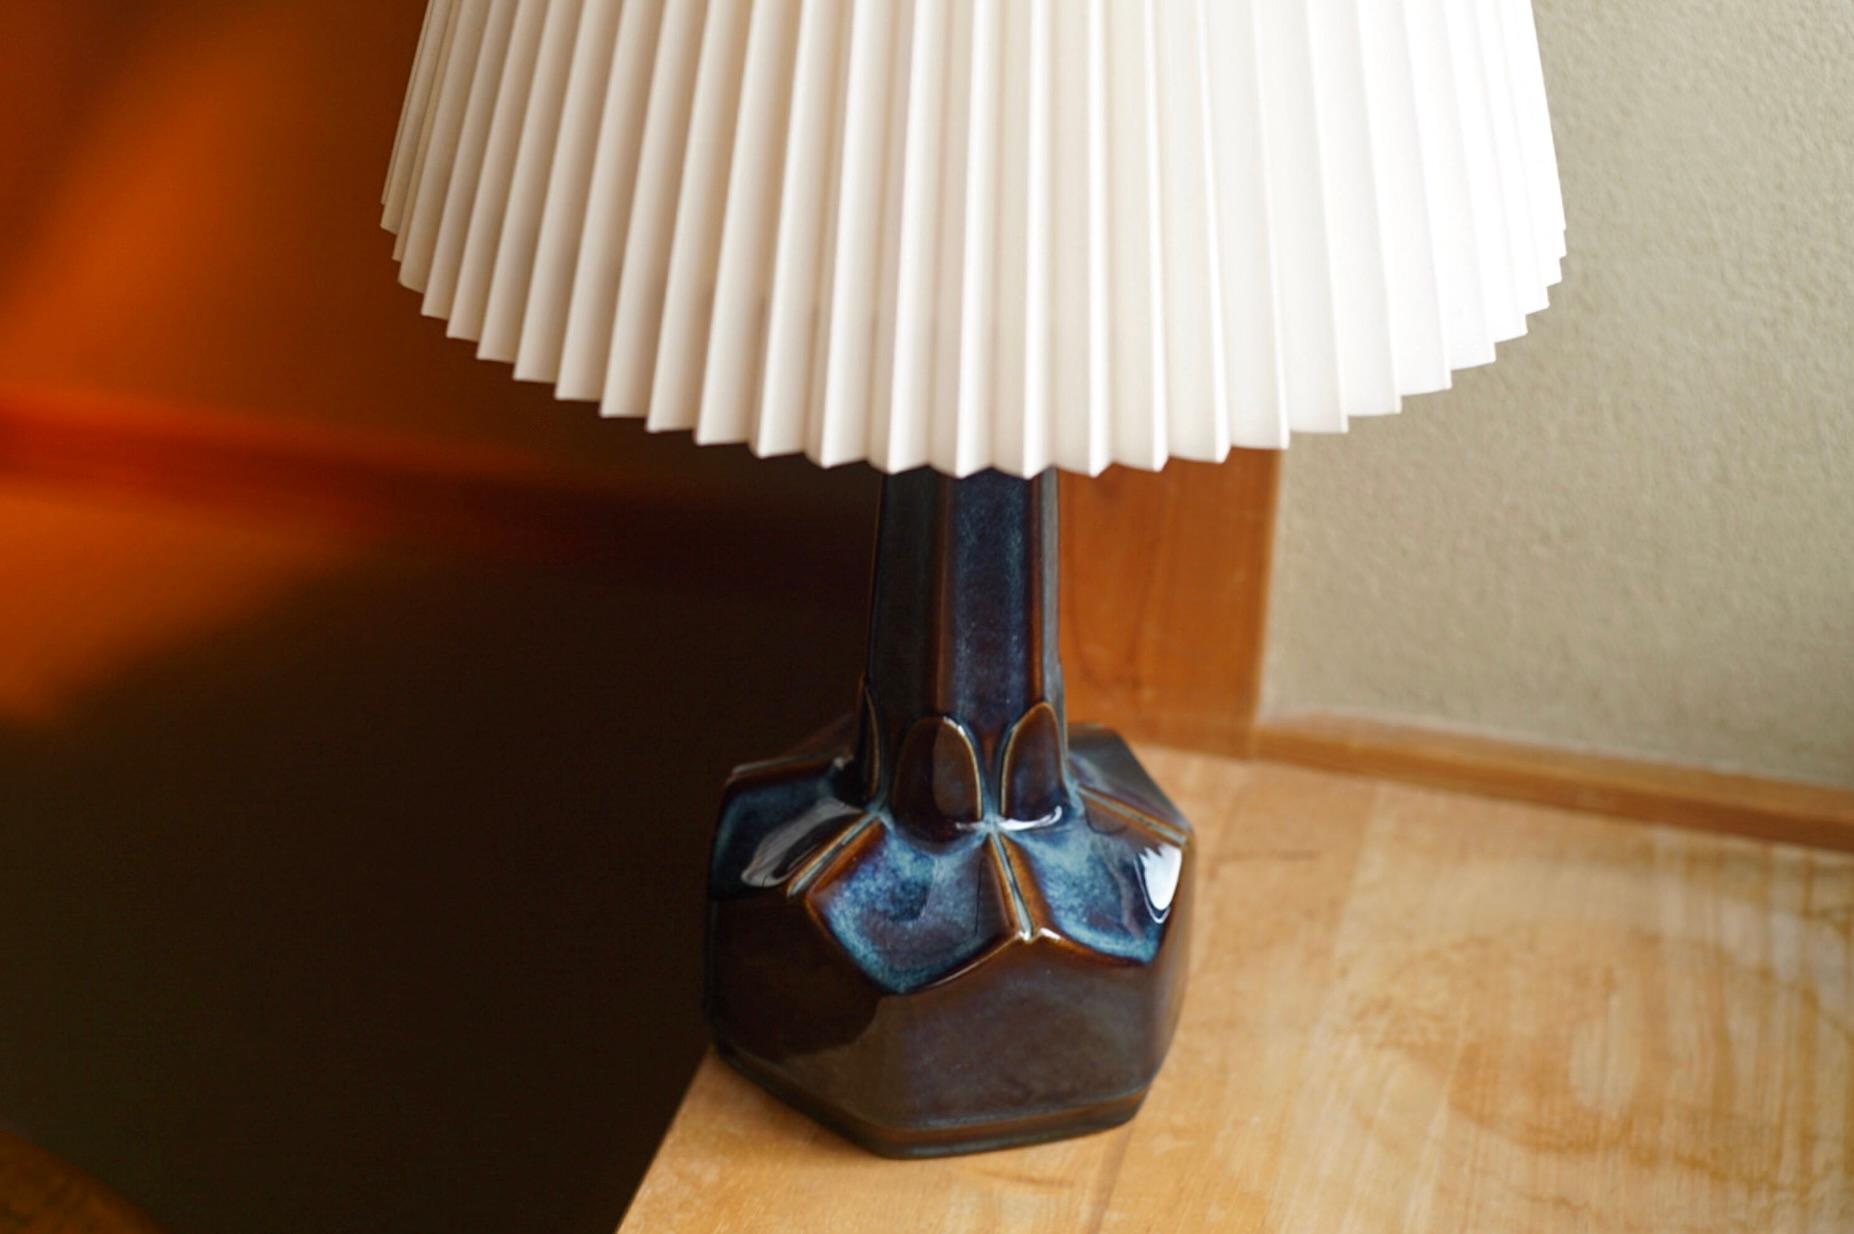 A stoneware table lamp handmade by Einar Jphansen for Danish Søholm located on the island of Bornholm in Denmark in the 1960s.

Stamped and signed on the base.

Sold without lampshade. Height includes socket. fully functional and in beautiful